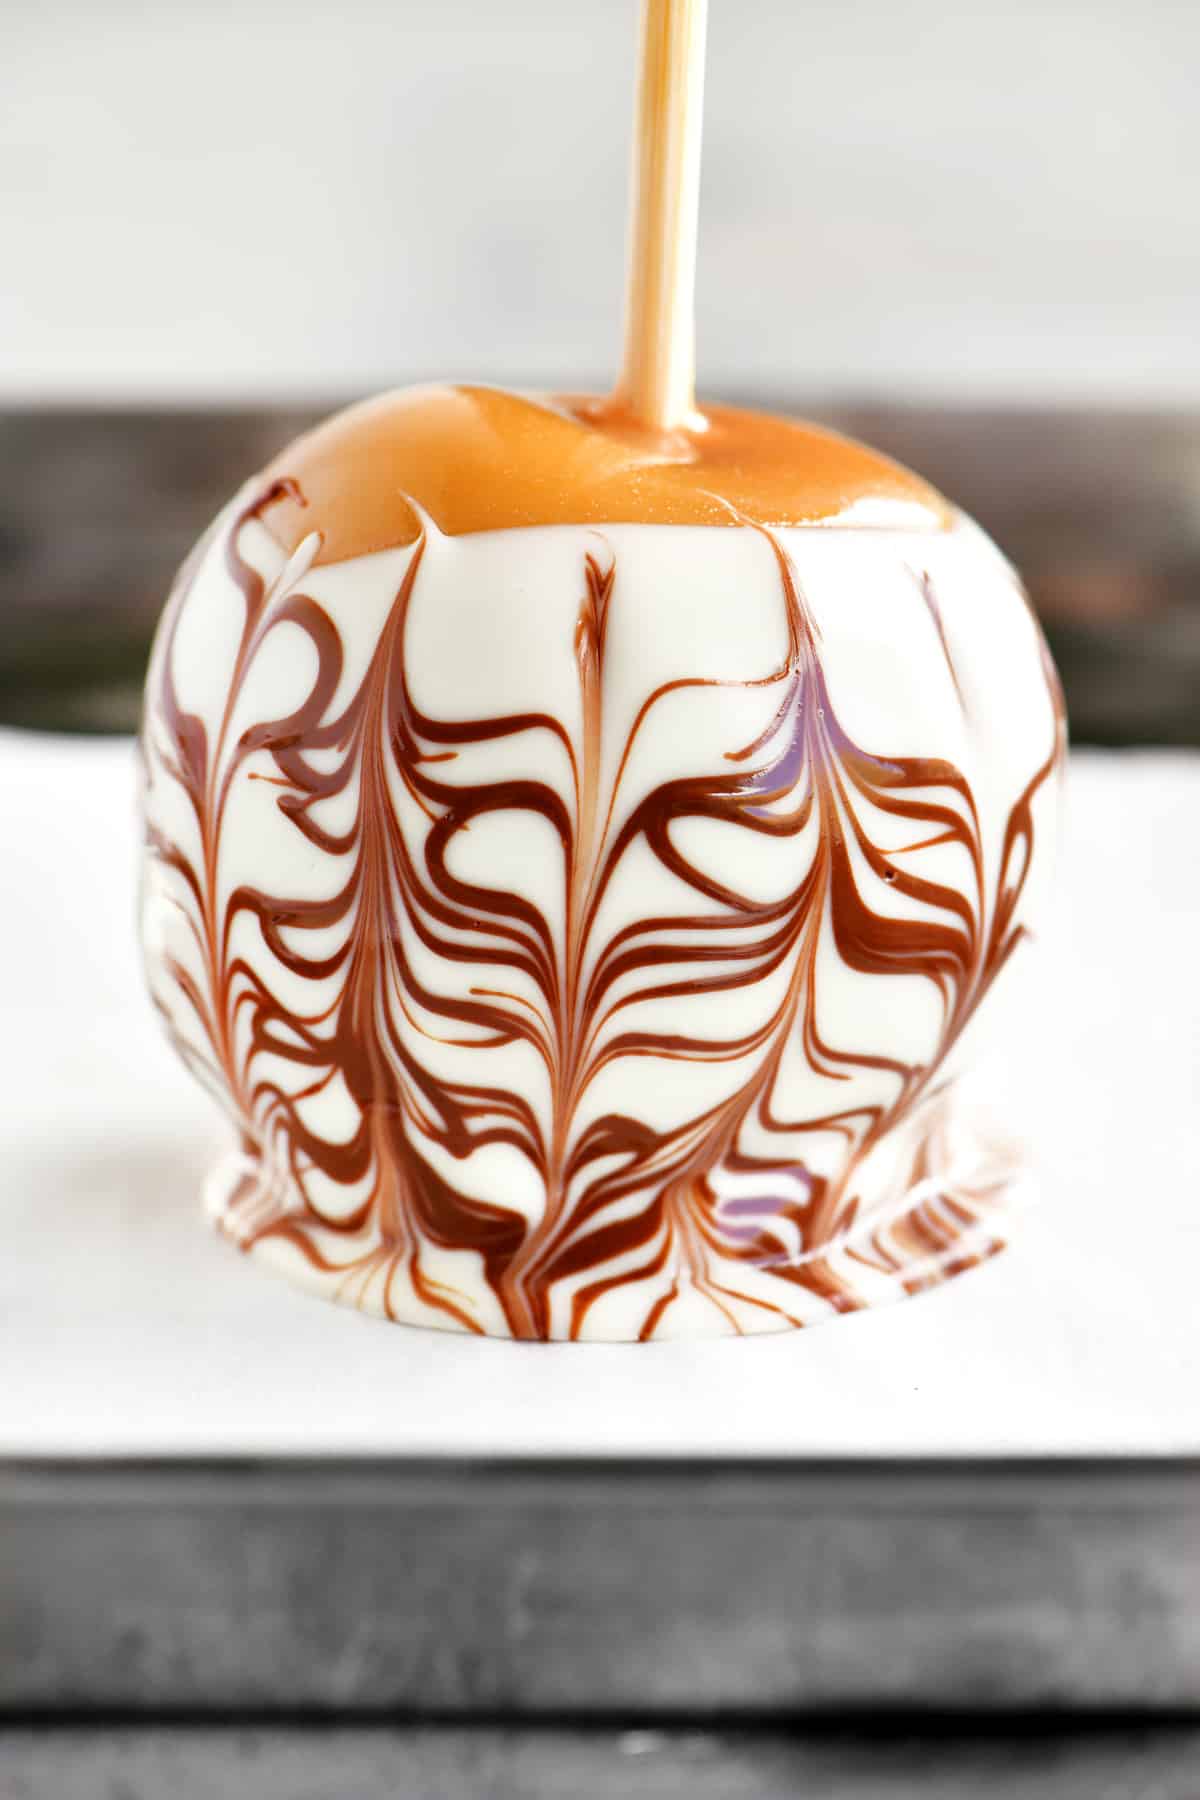 a caramel apple with a white and brown chocolate spiderweb design